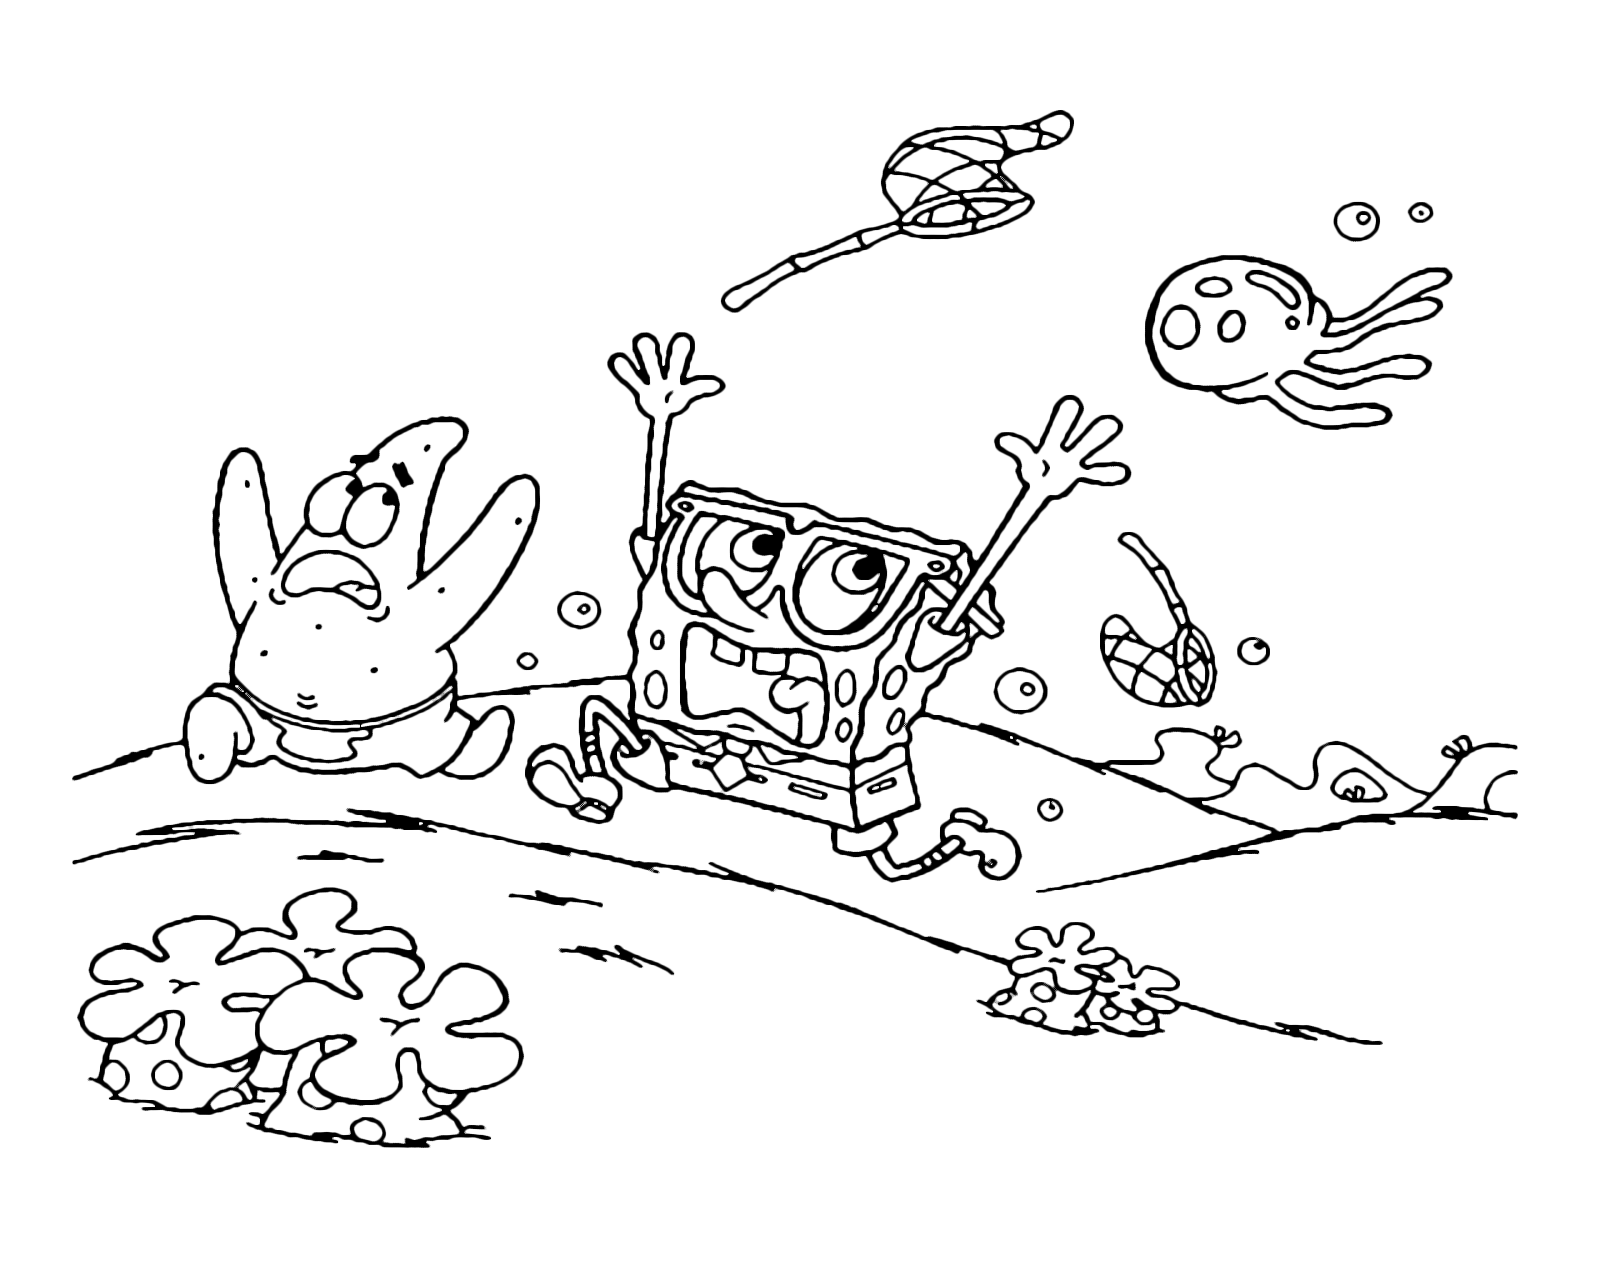 spongebob patrick jelly fishing coloring pages